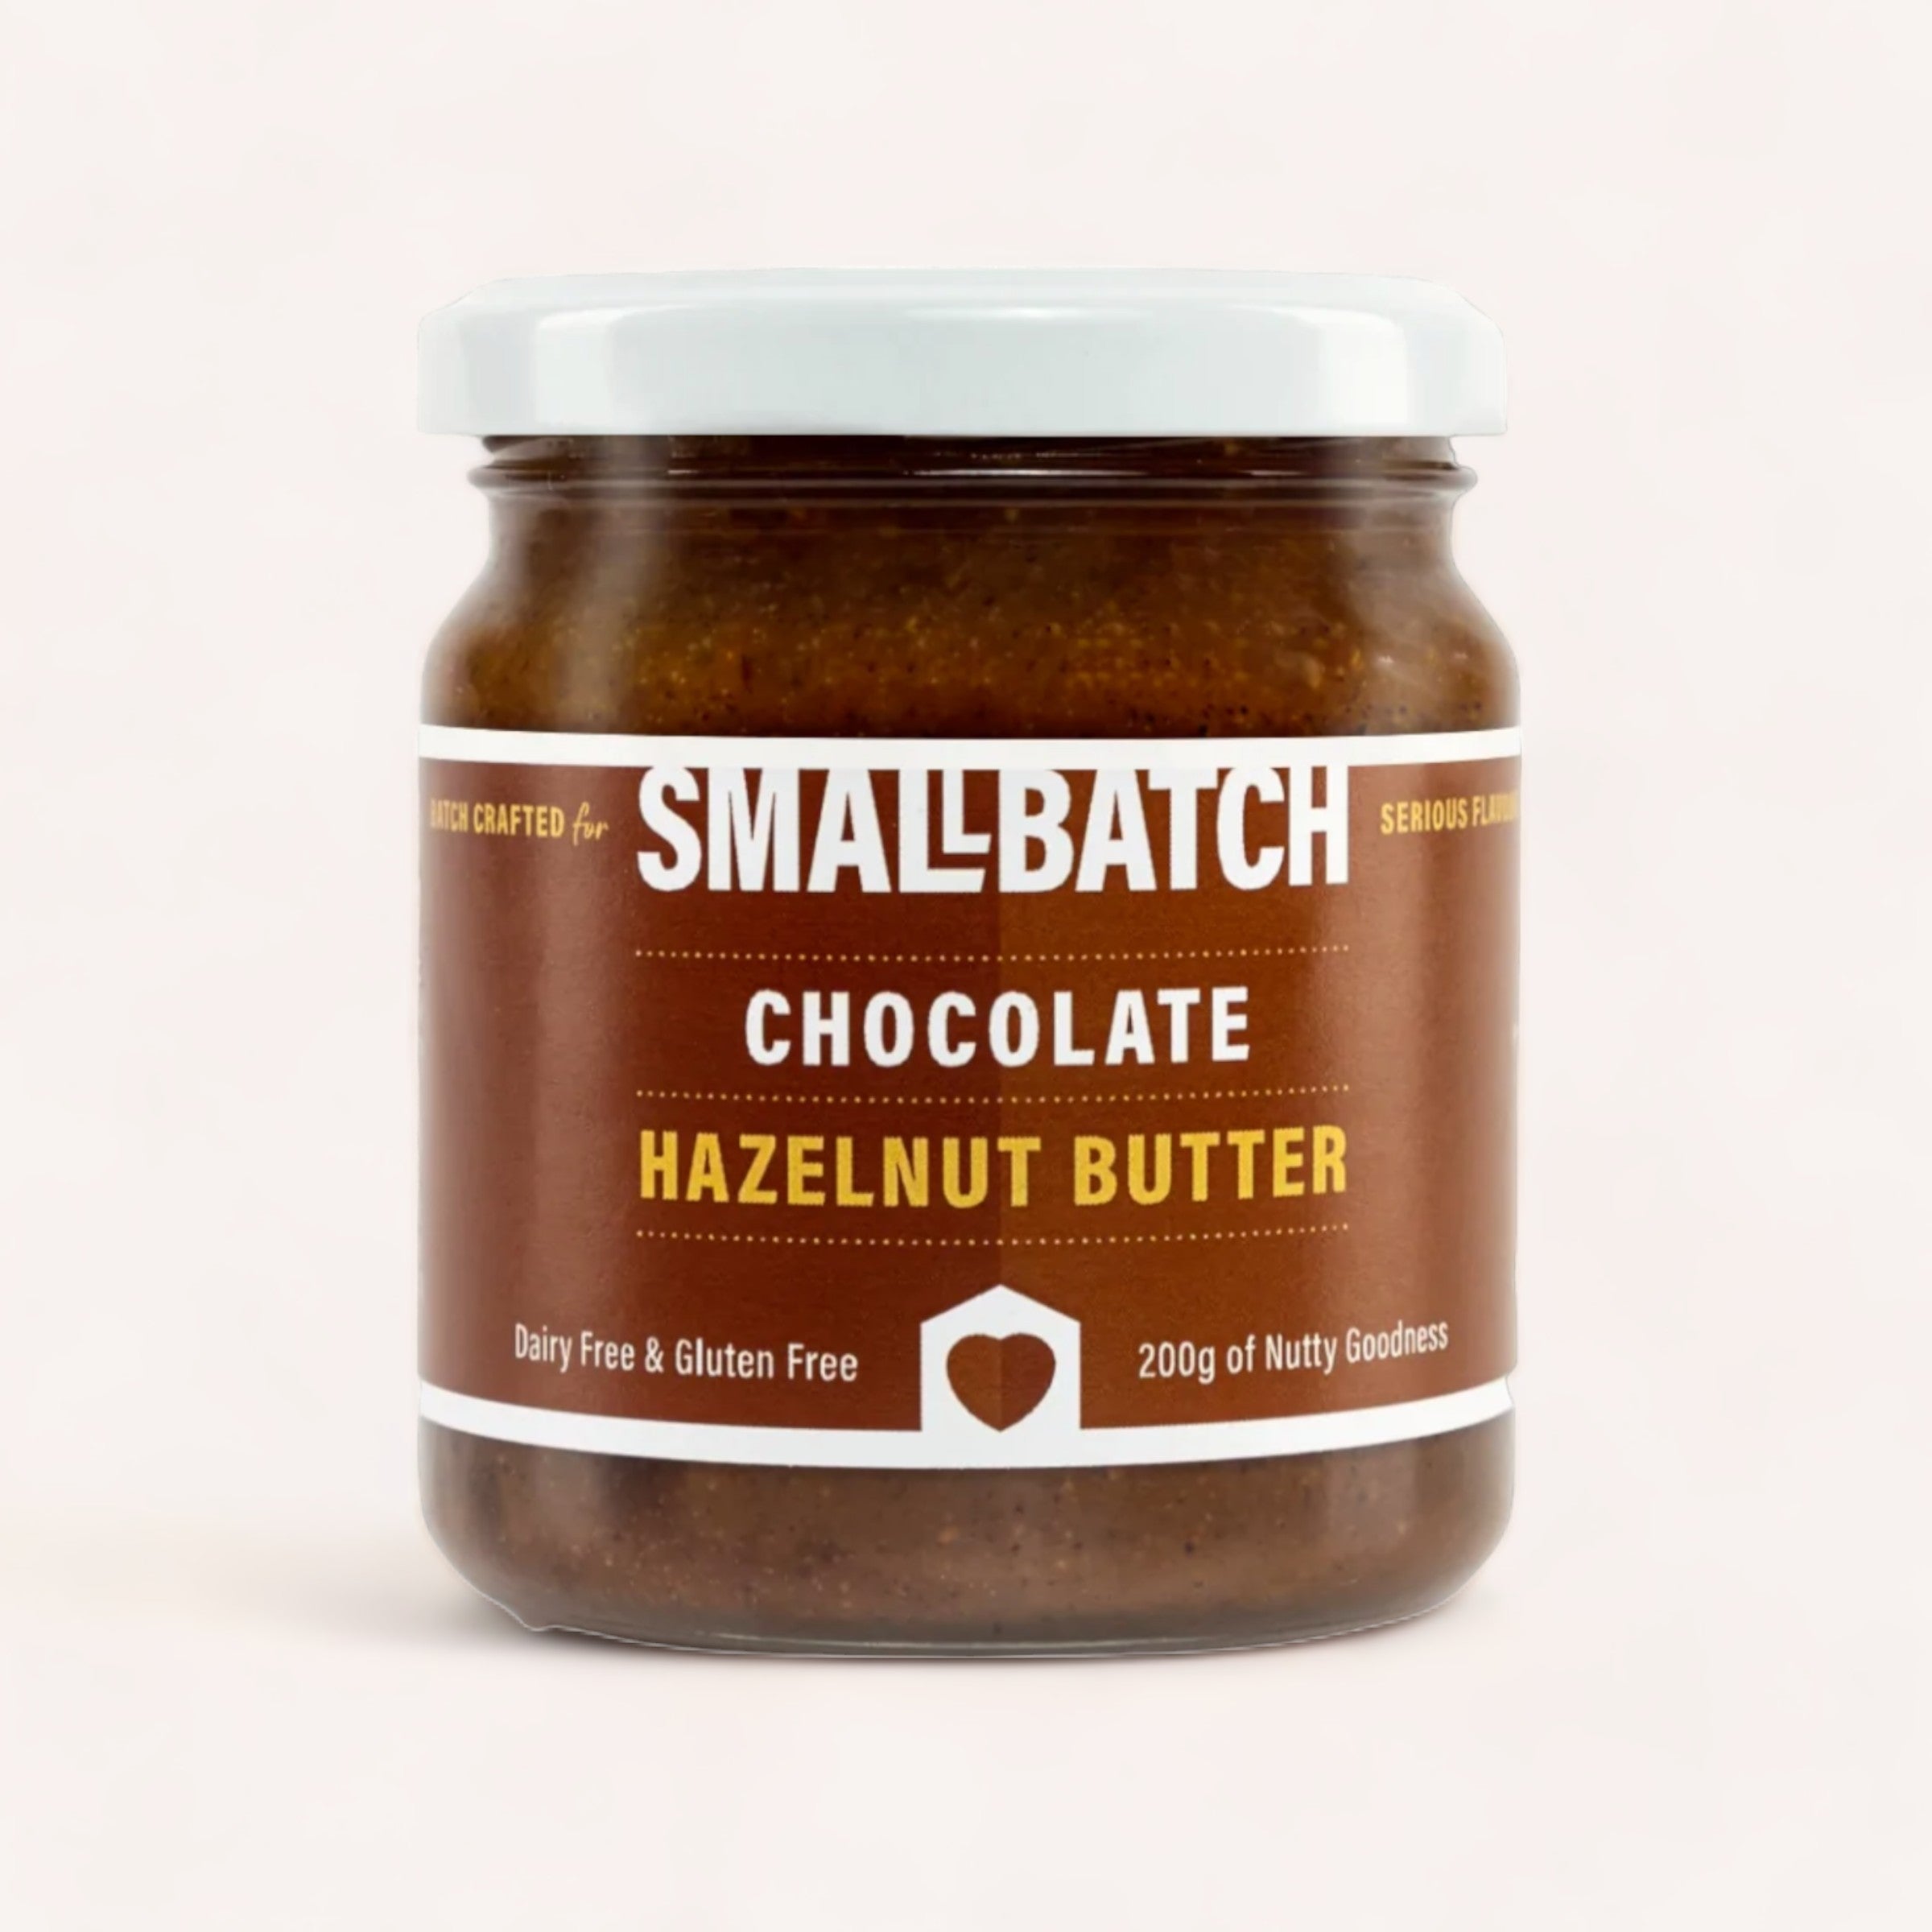 A jar of Chocolate Hazelnut Butter by Smallbatch, made in Mount Maunganui, highlighting its artisanal quality with a tagline "serious flavor," and indicating that it's dairy-free and gluten.